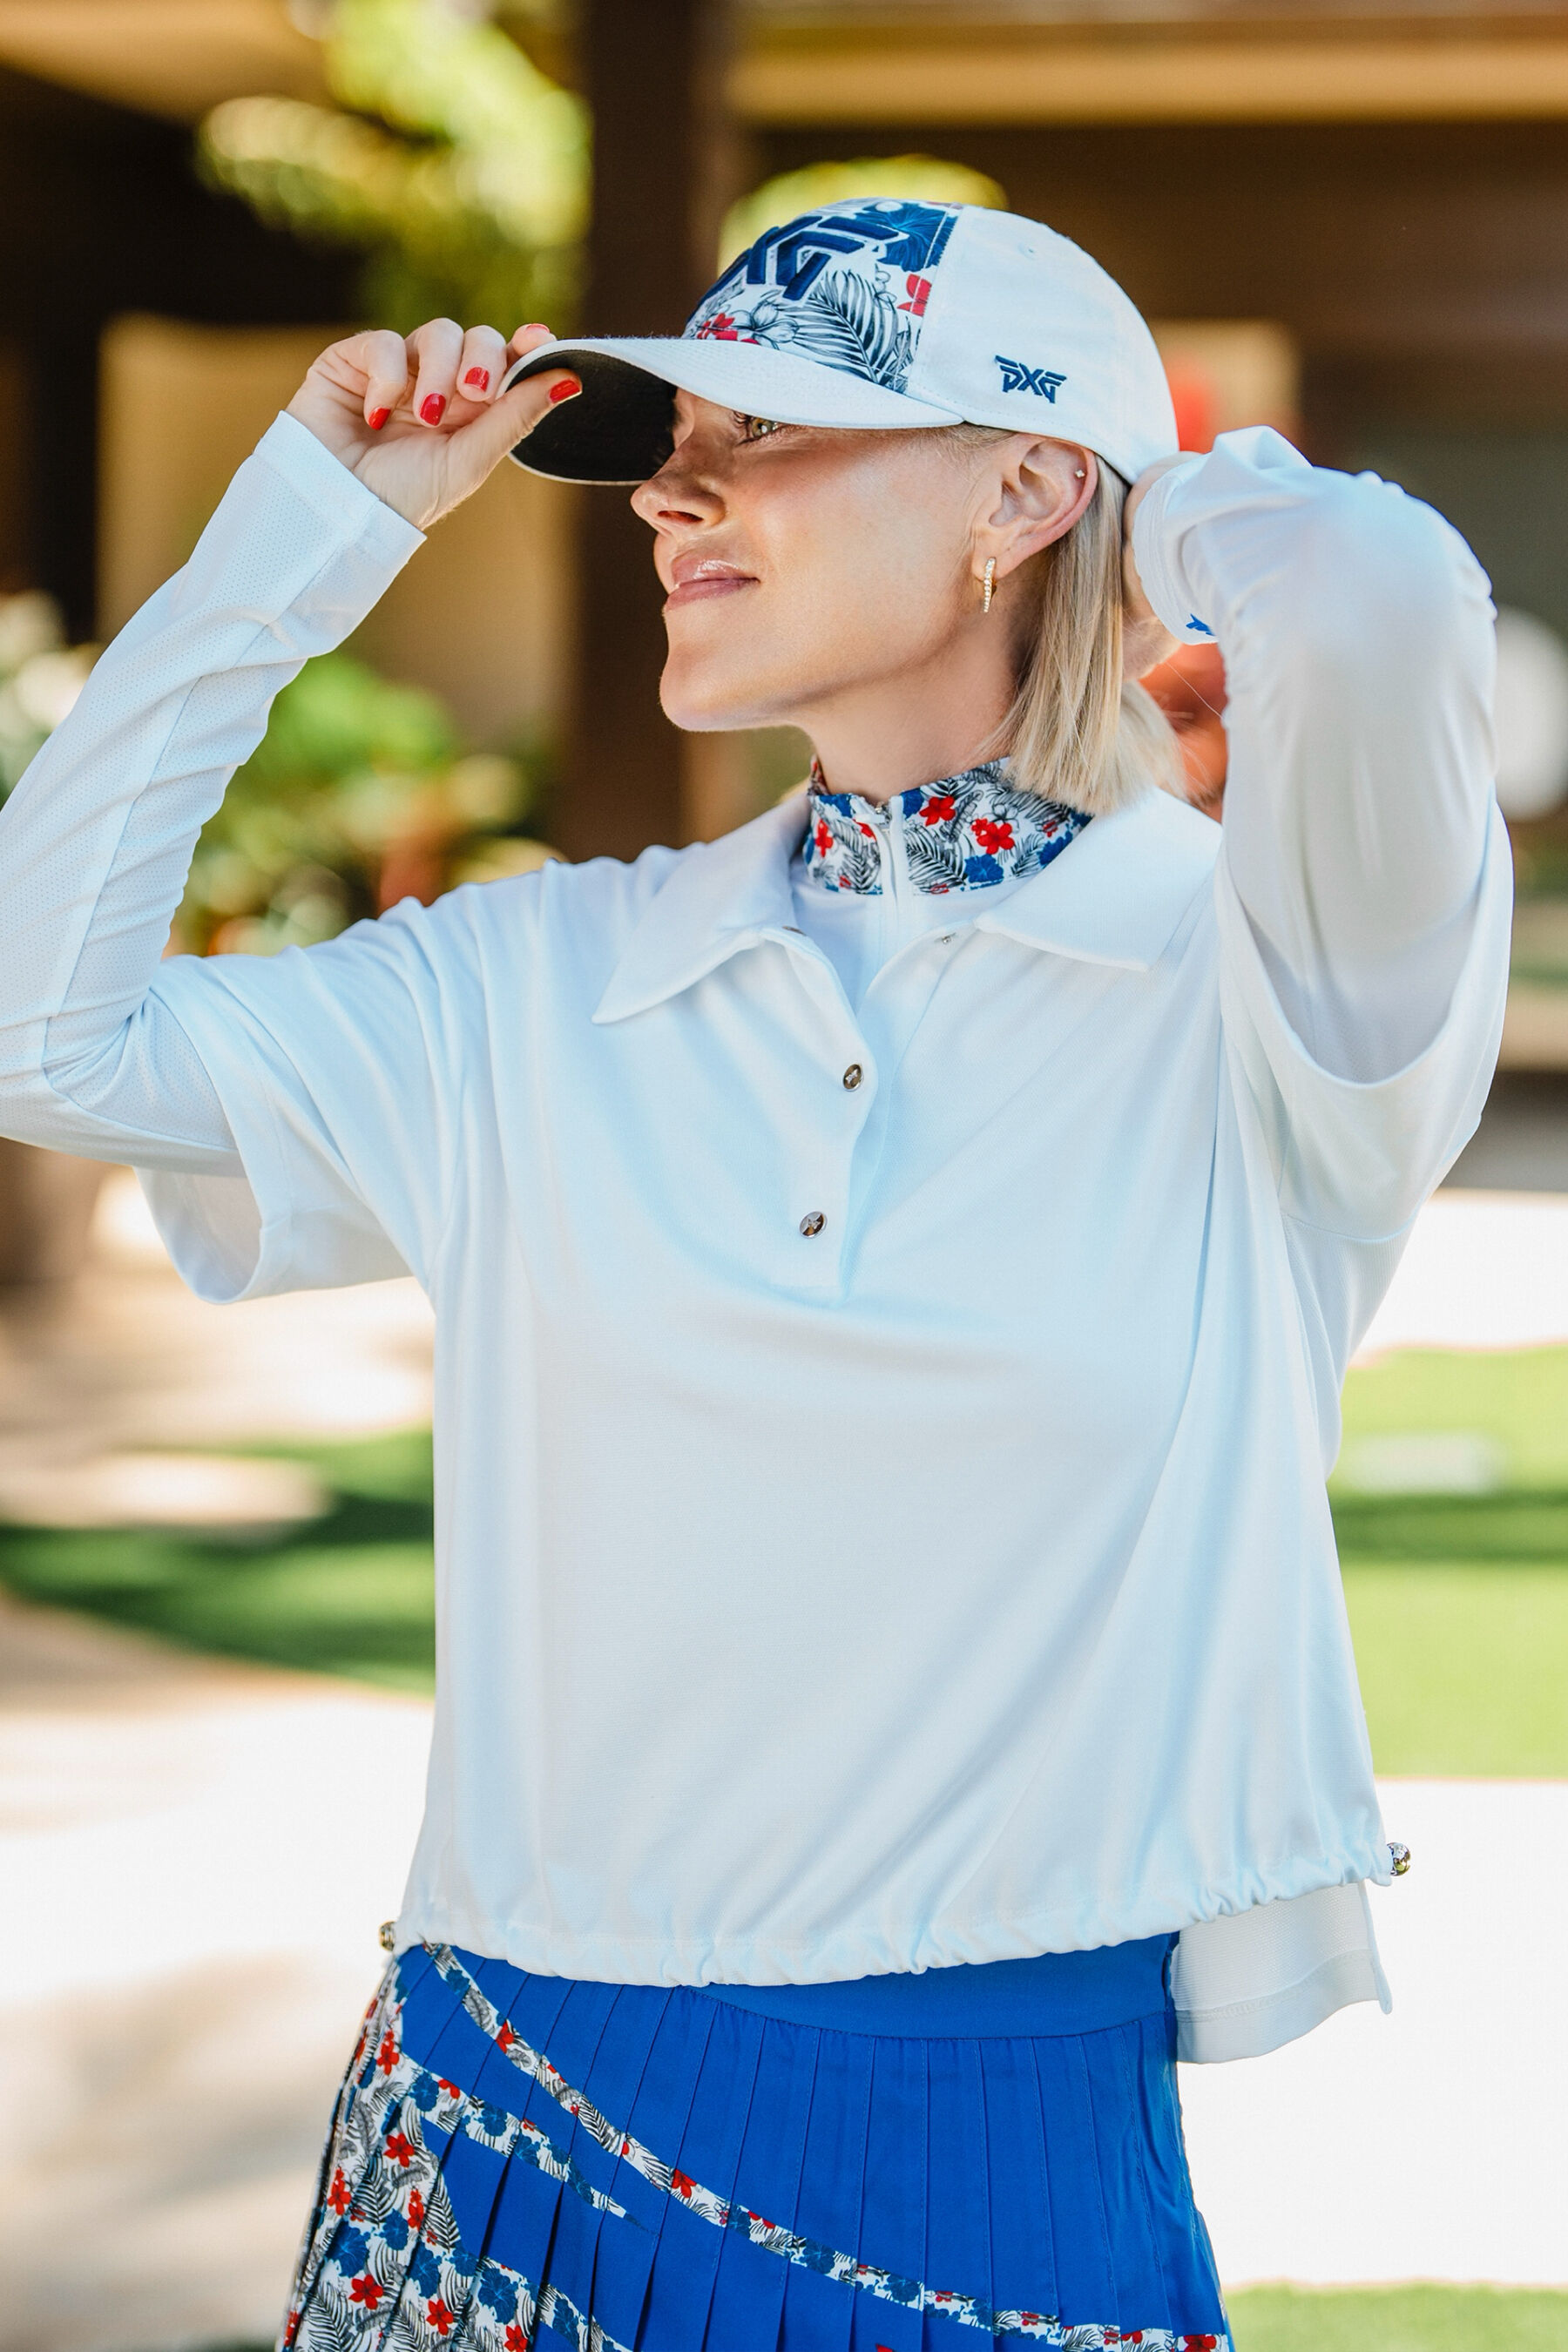 Shop Women's Golf トップス, Shirts and Polos | PXG JP